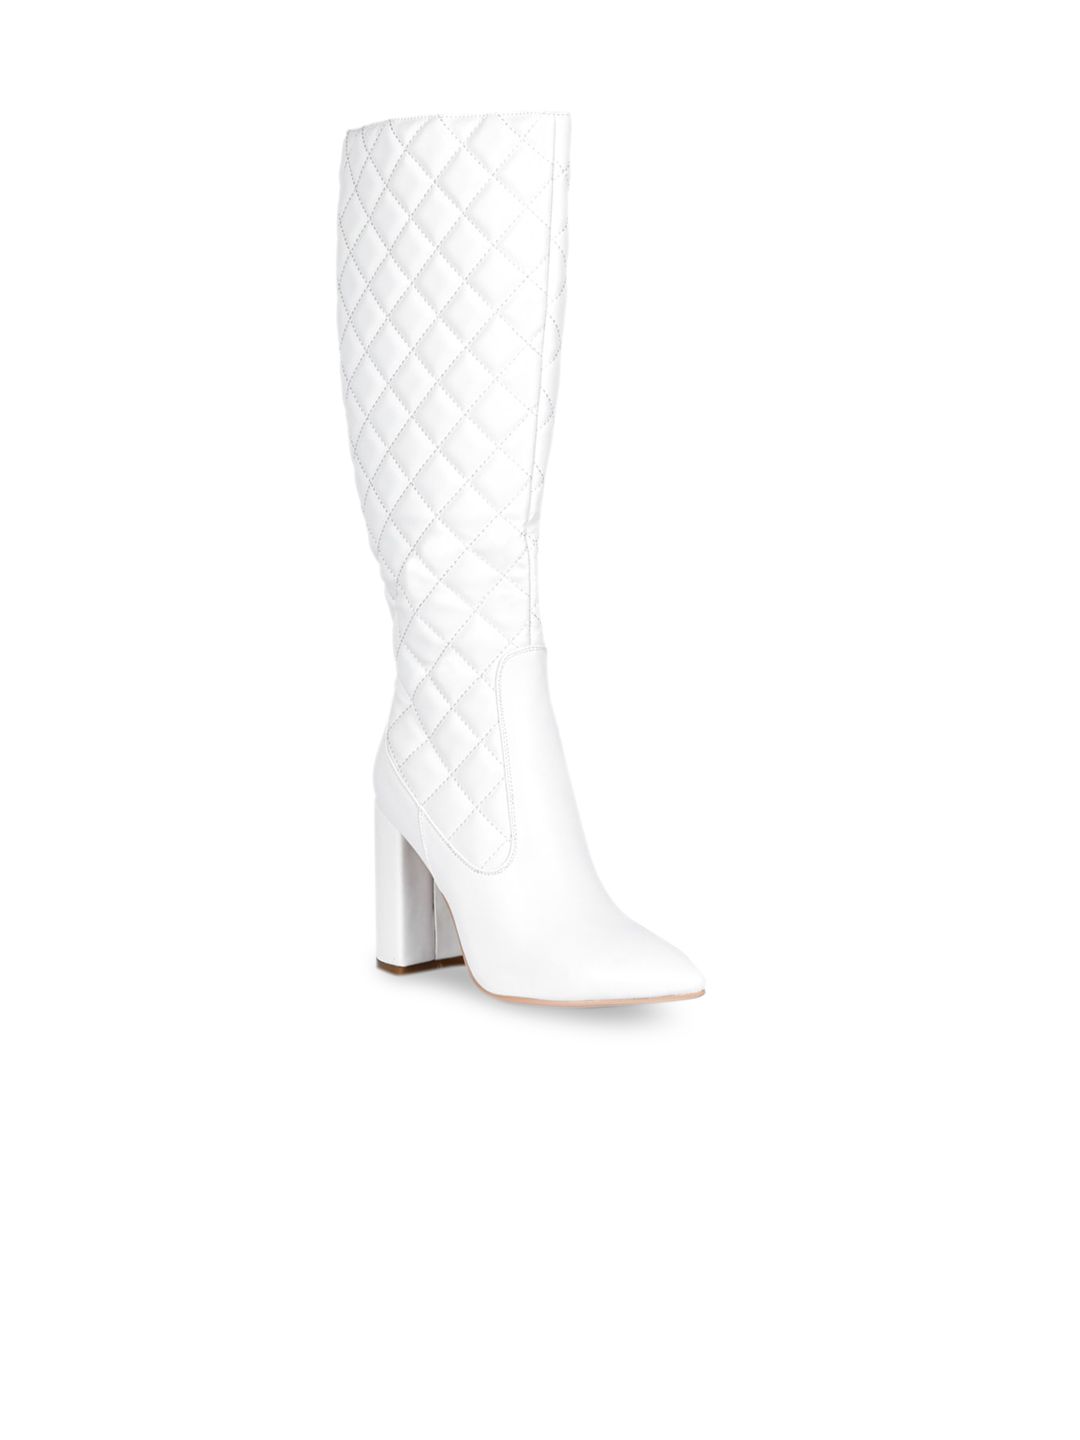 London Rag White Qulited Party High-Top Block Heeled Boots Price in India